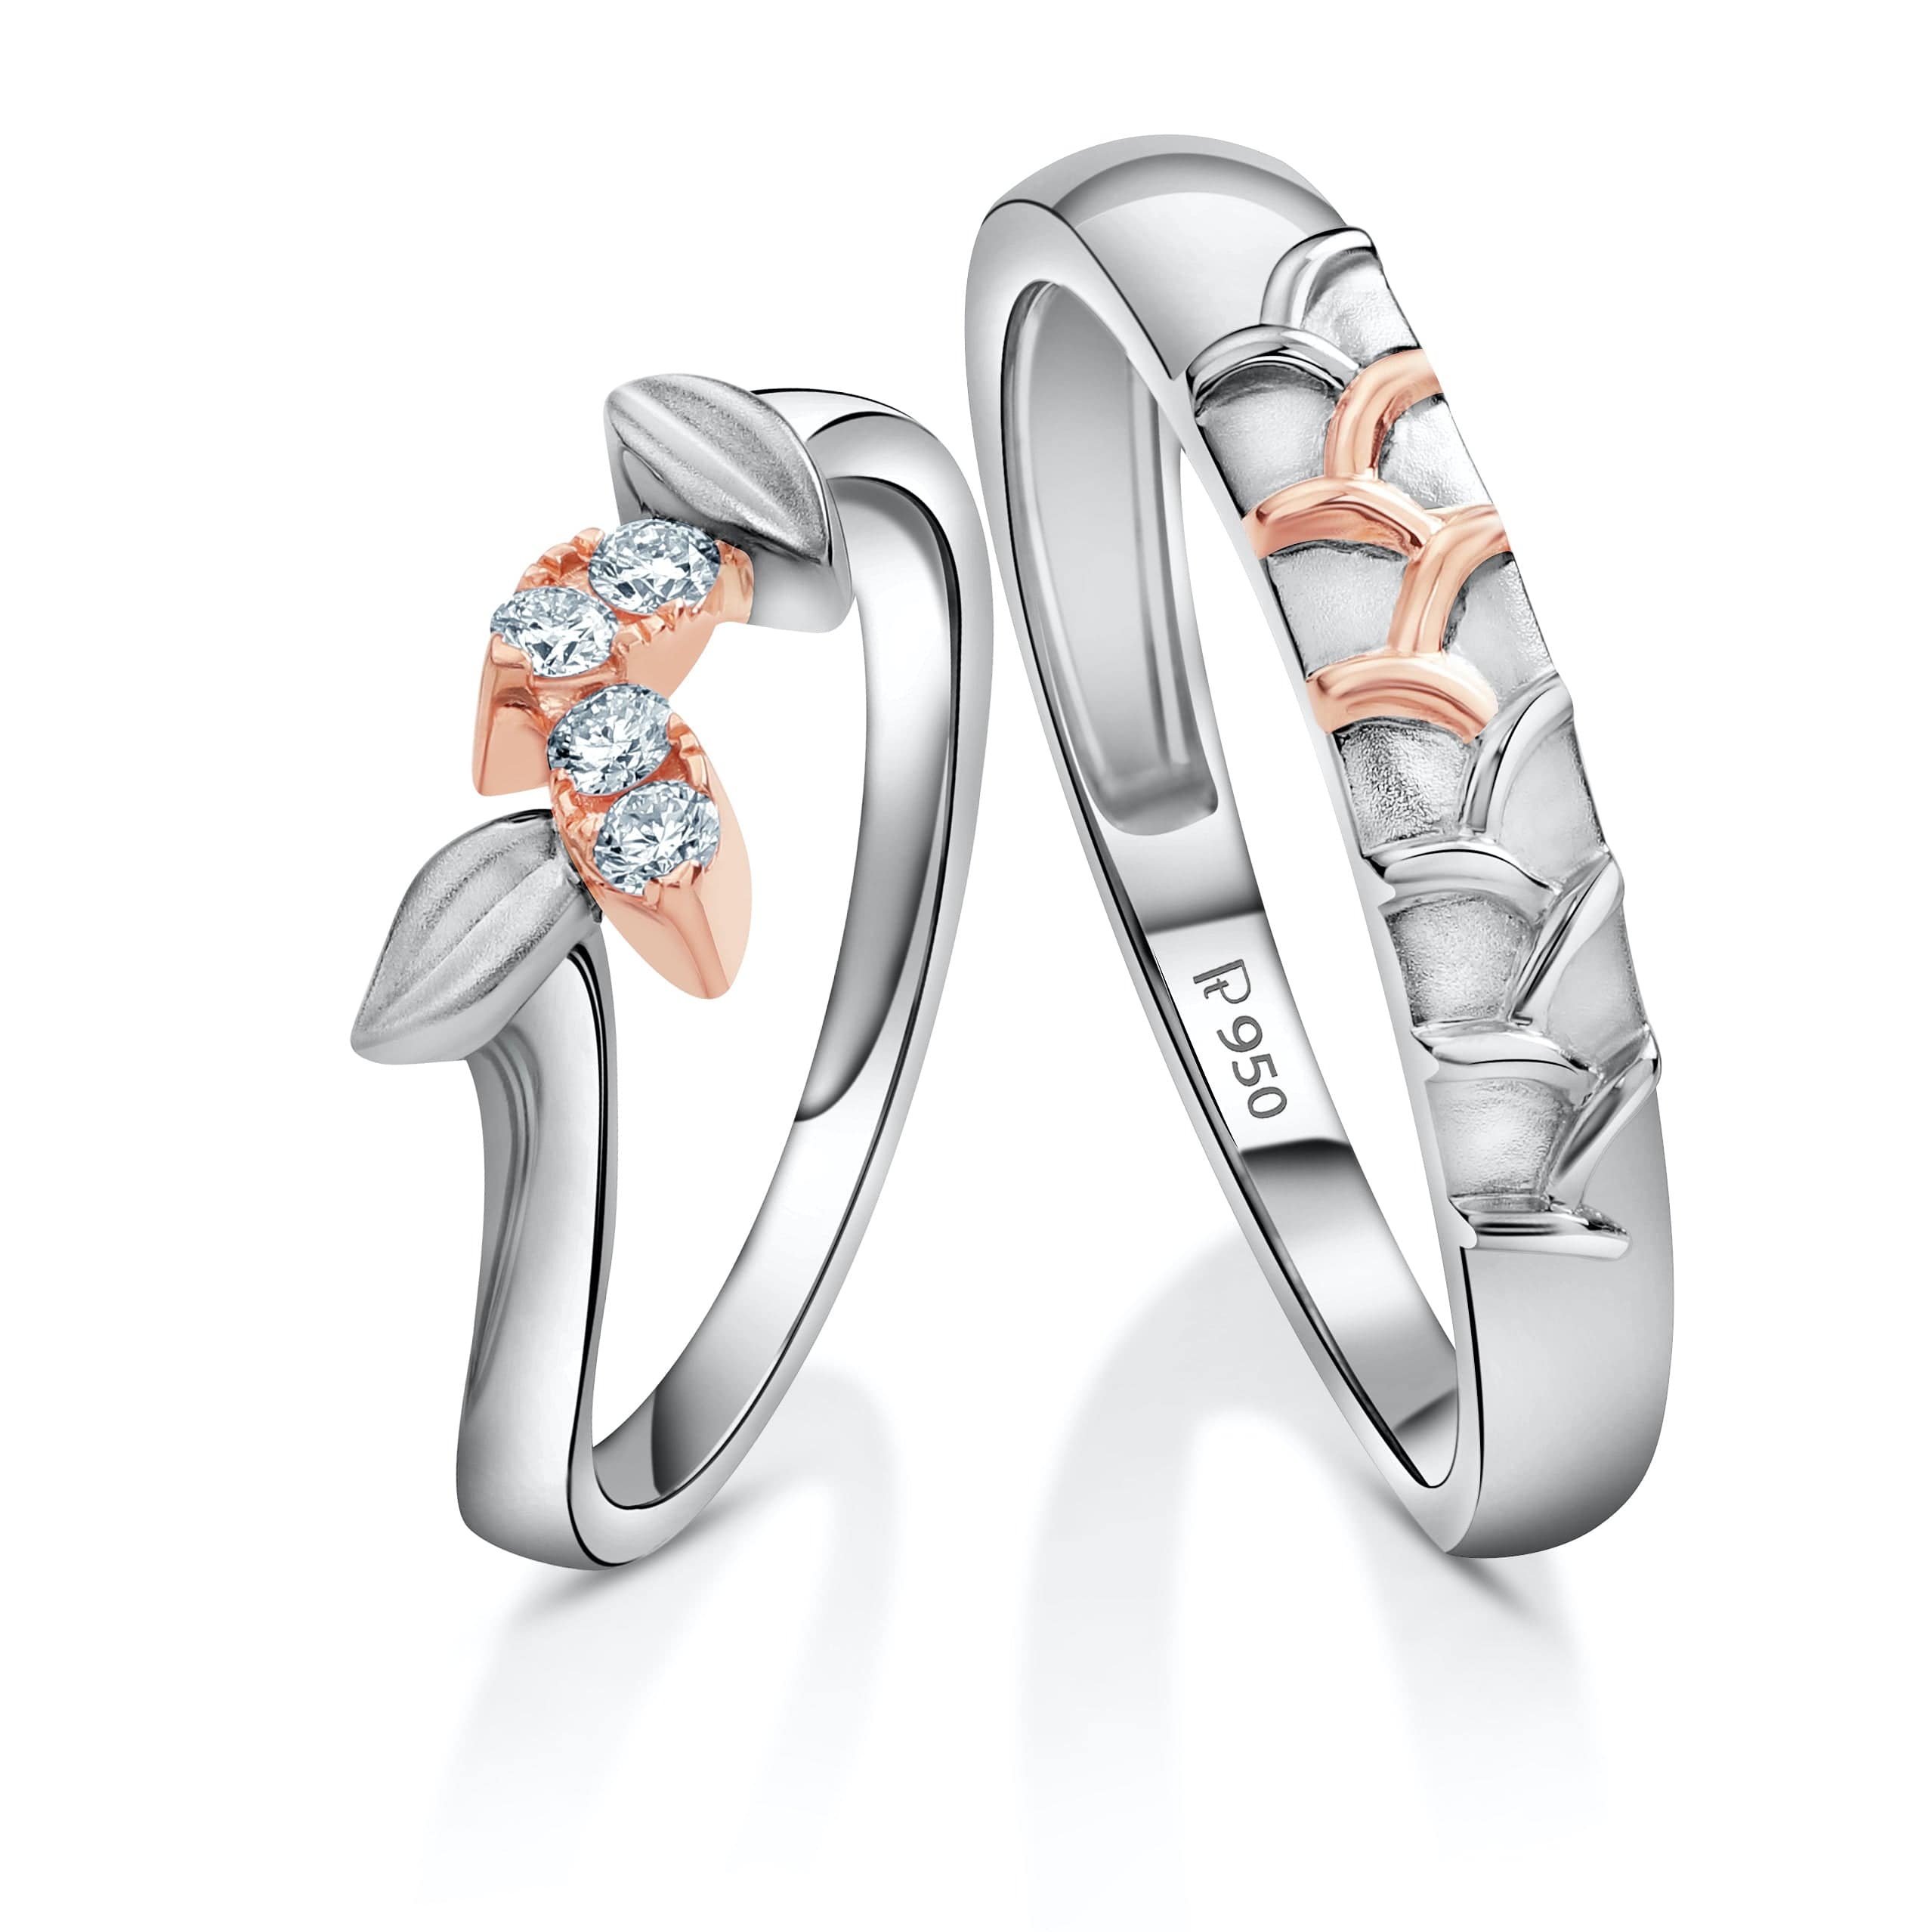 Jewellery - Rings in silver, gold and rose gold | DW